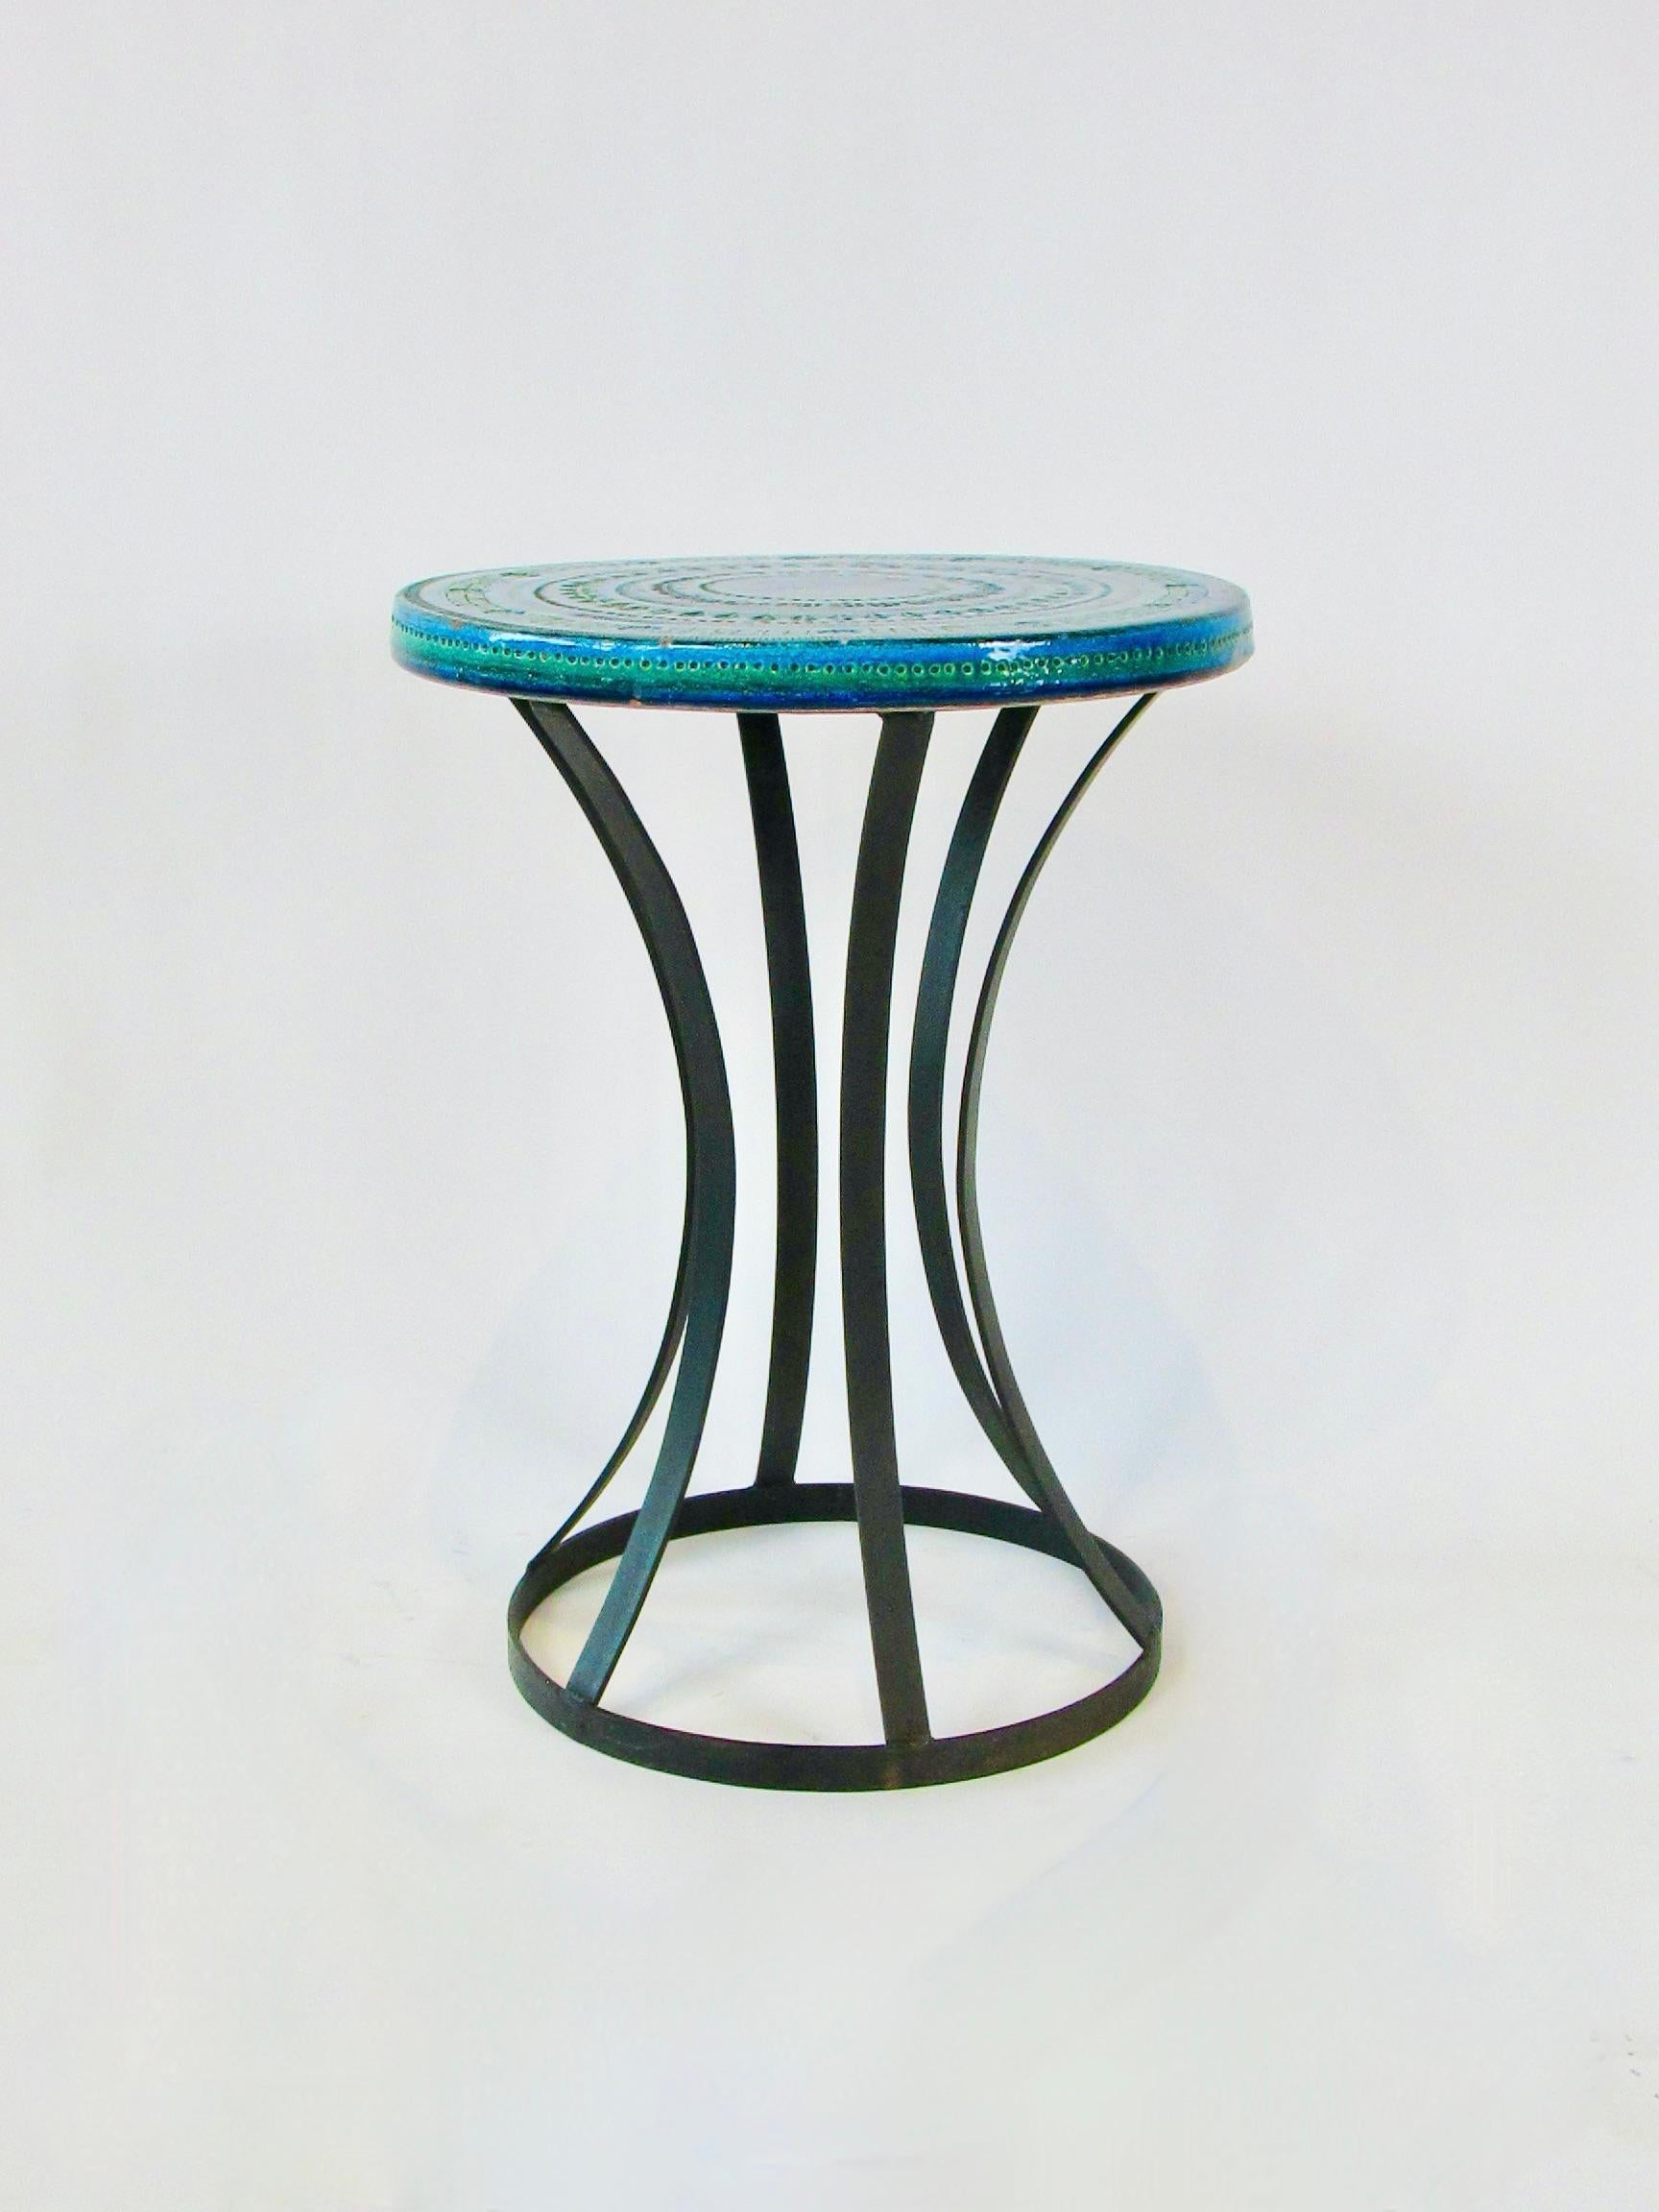 Italian Blue Green Aldo Londi Bitossi for Raymor Pottery Table Top on Wrought Base For Sale